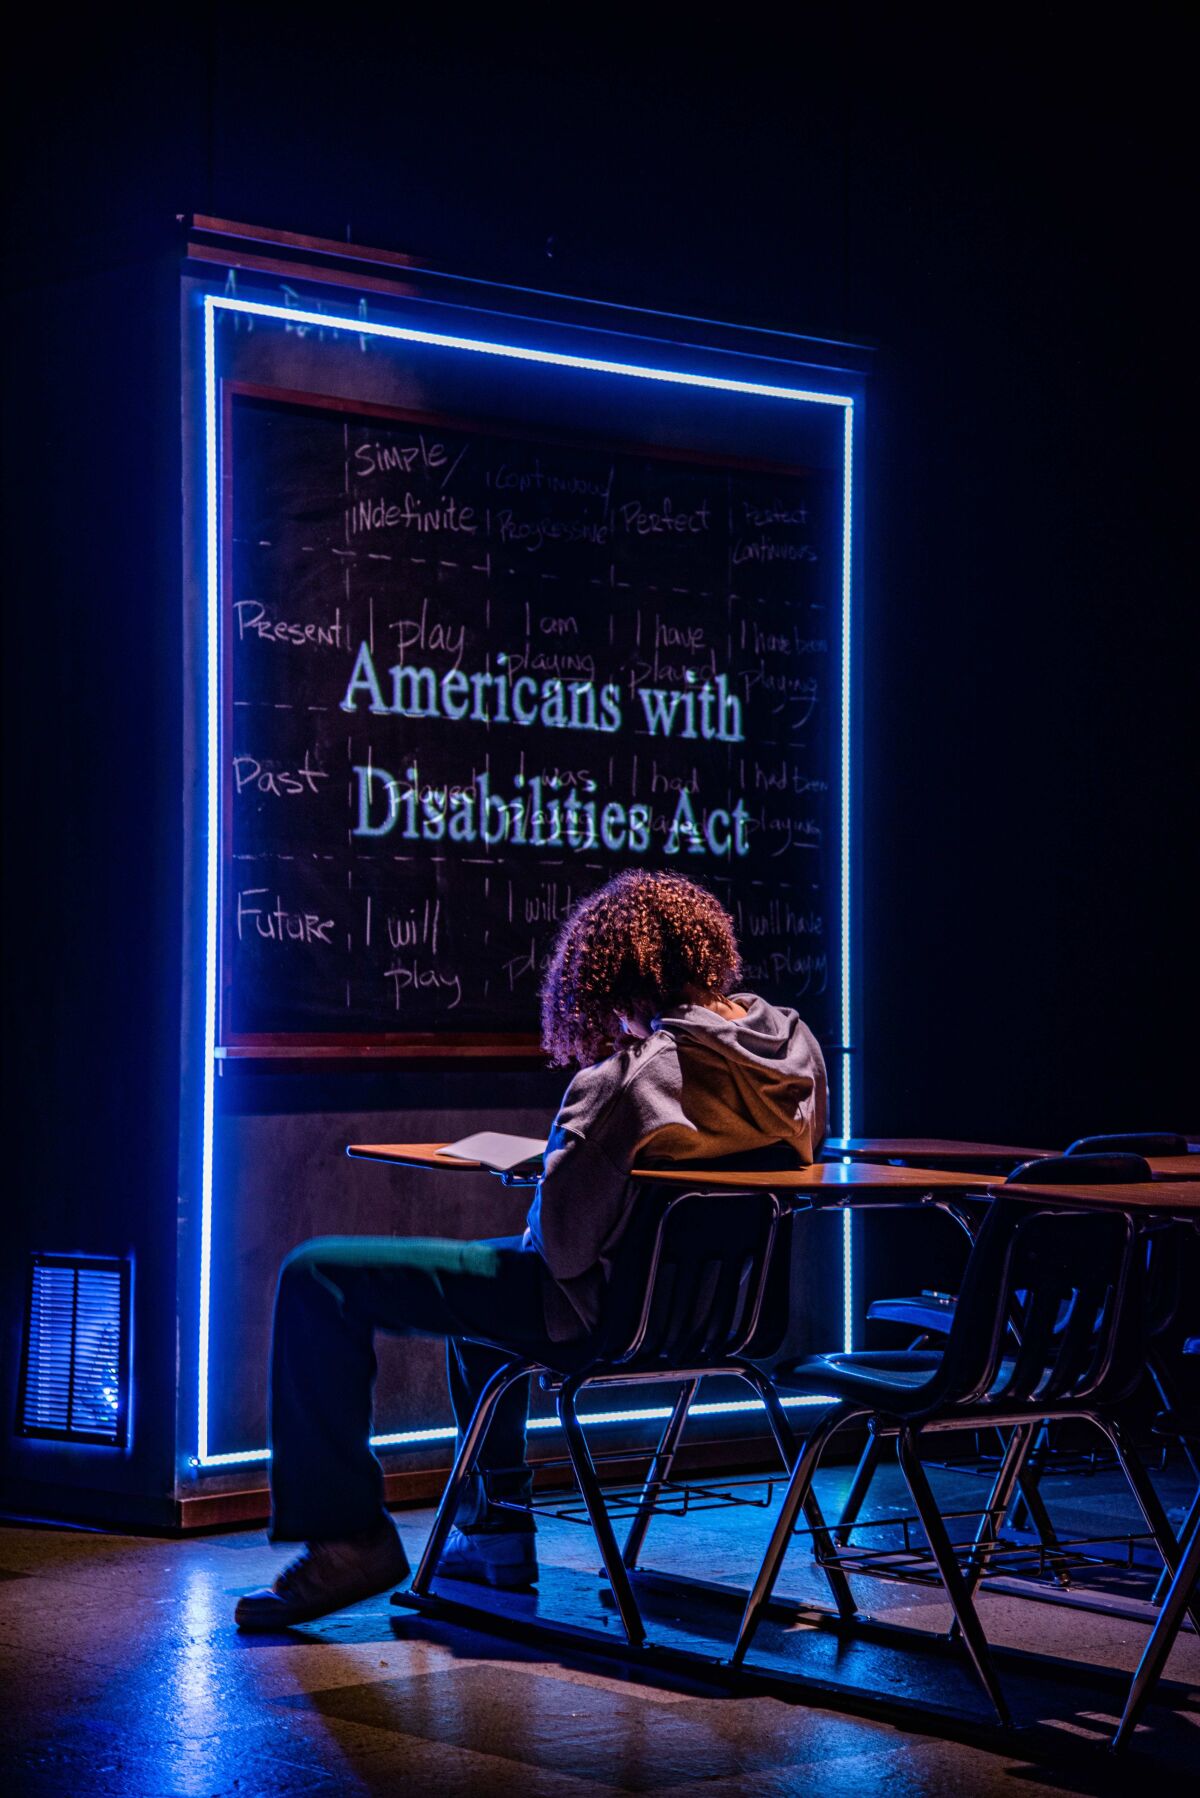 A young man sitting at a classroom desk with 'Americans with Disabilities Act' projected on the wall